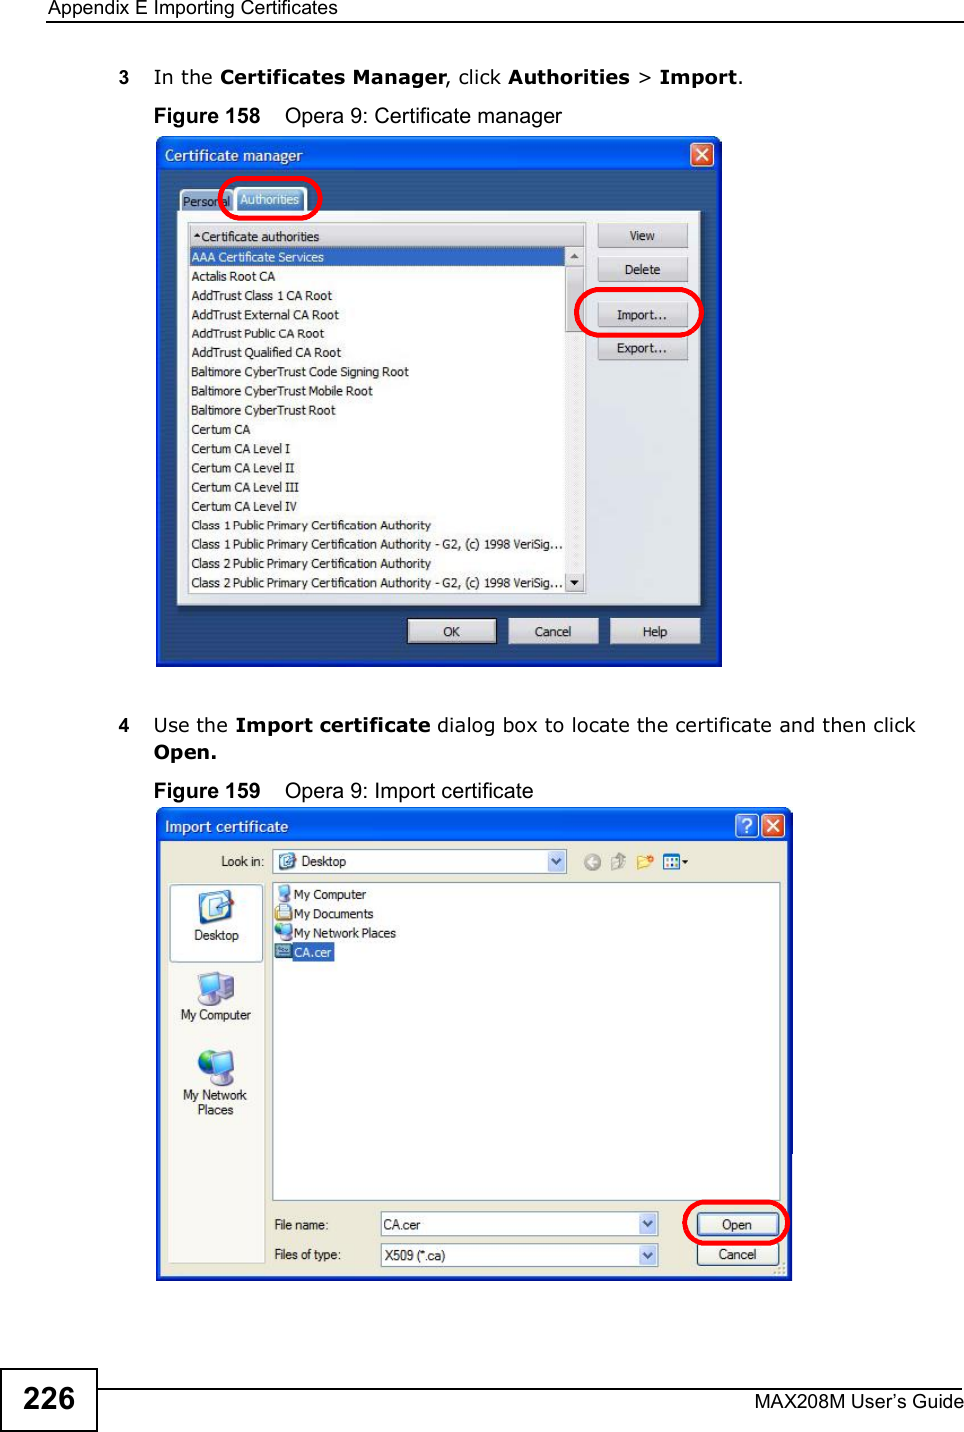 Appendix EImporting CertificatesMAX208M User s Guide2263In the Certificates Manager, click Authorities &gt; Import.Figure 158    Opera 9: Certificate manager4Use the Import certificate dialog box to locate the certificate and then click Open.Figure 159    Opera 9: Import certificate